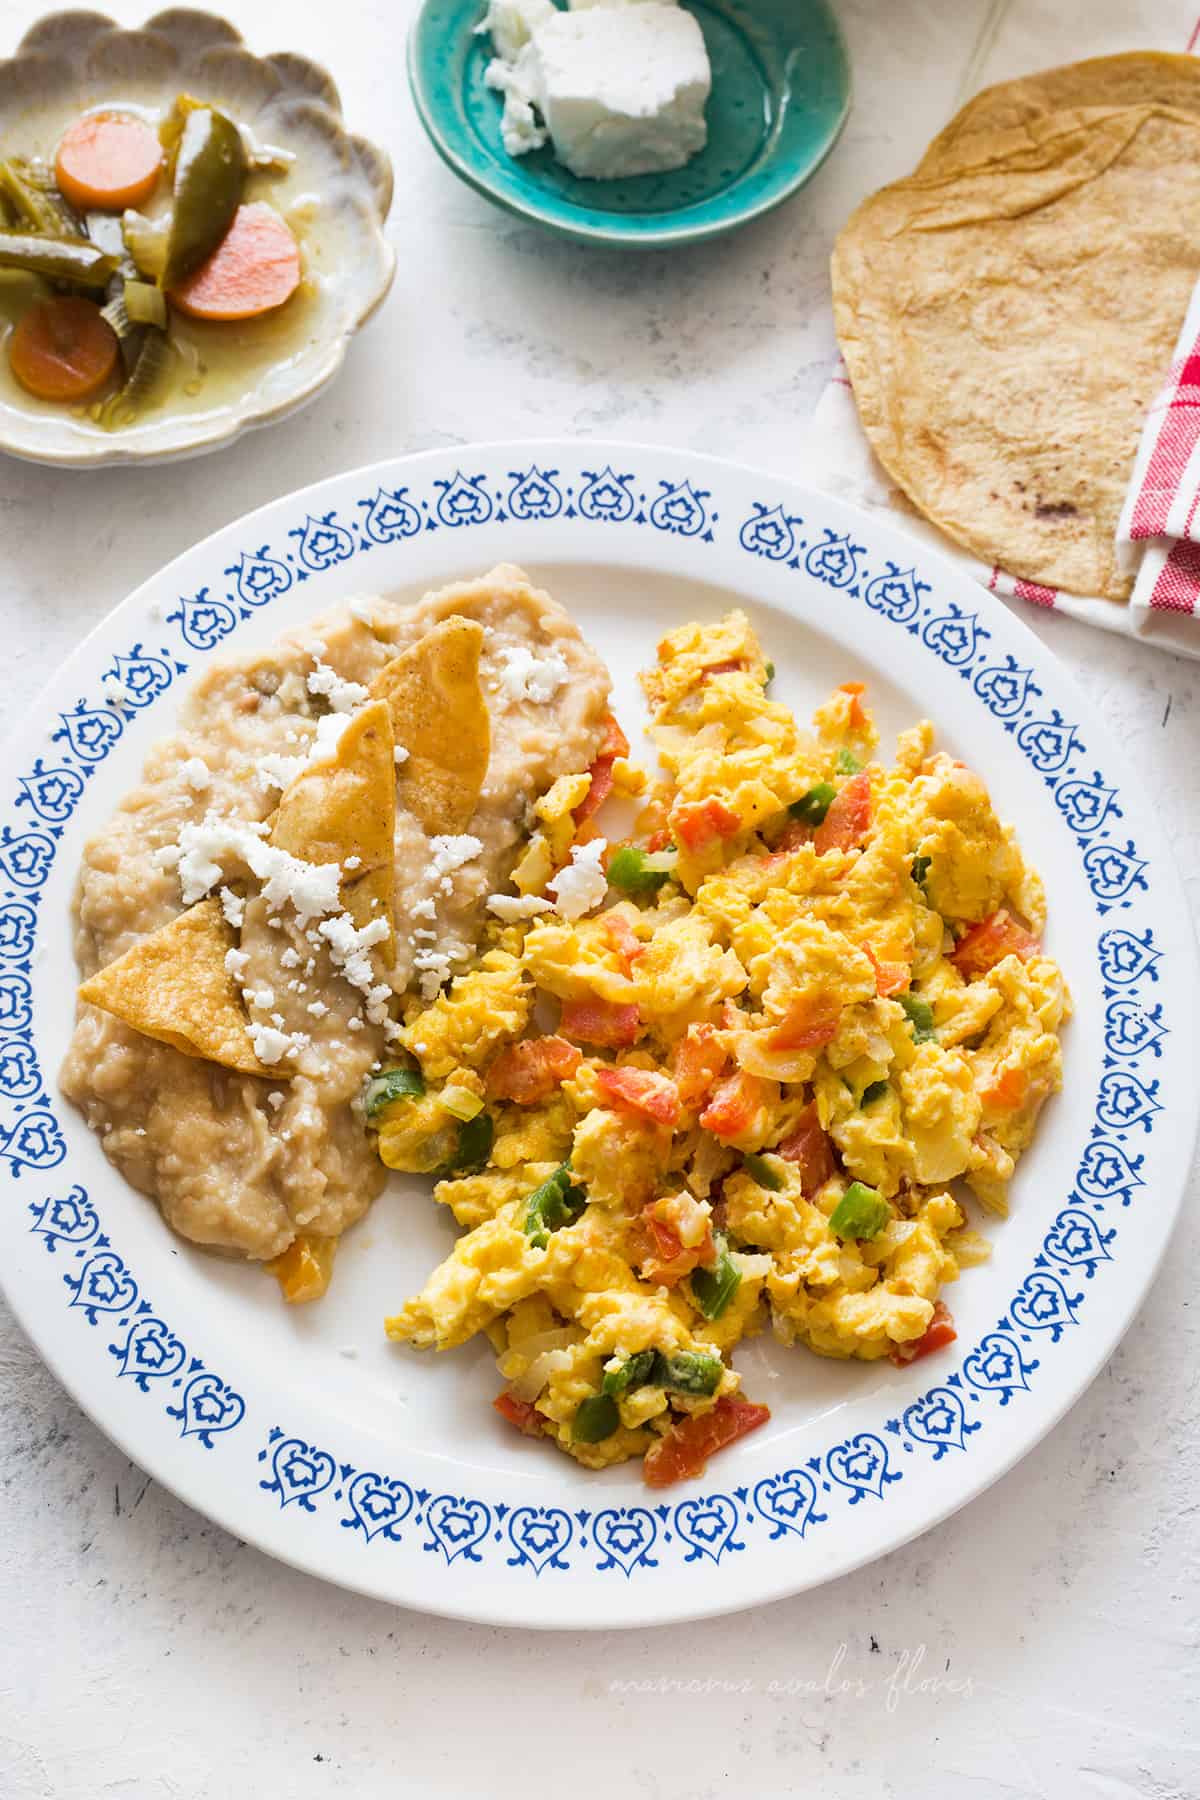 Huevos a la mexicana (scrambled eggs mexican style) served on a plate with refried beans, totopos and cheese.